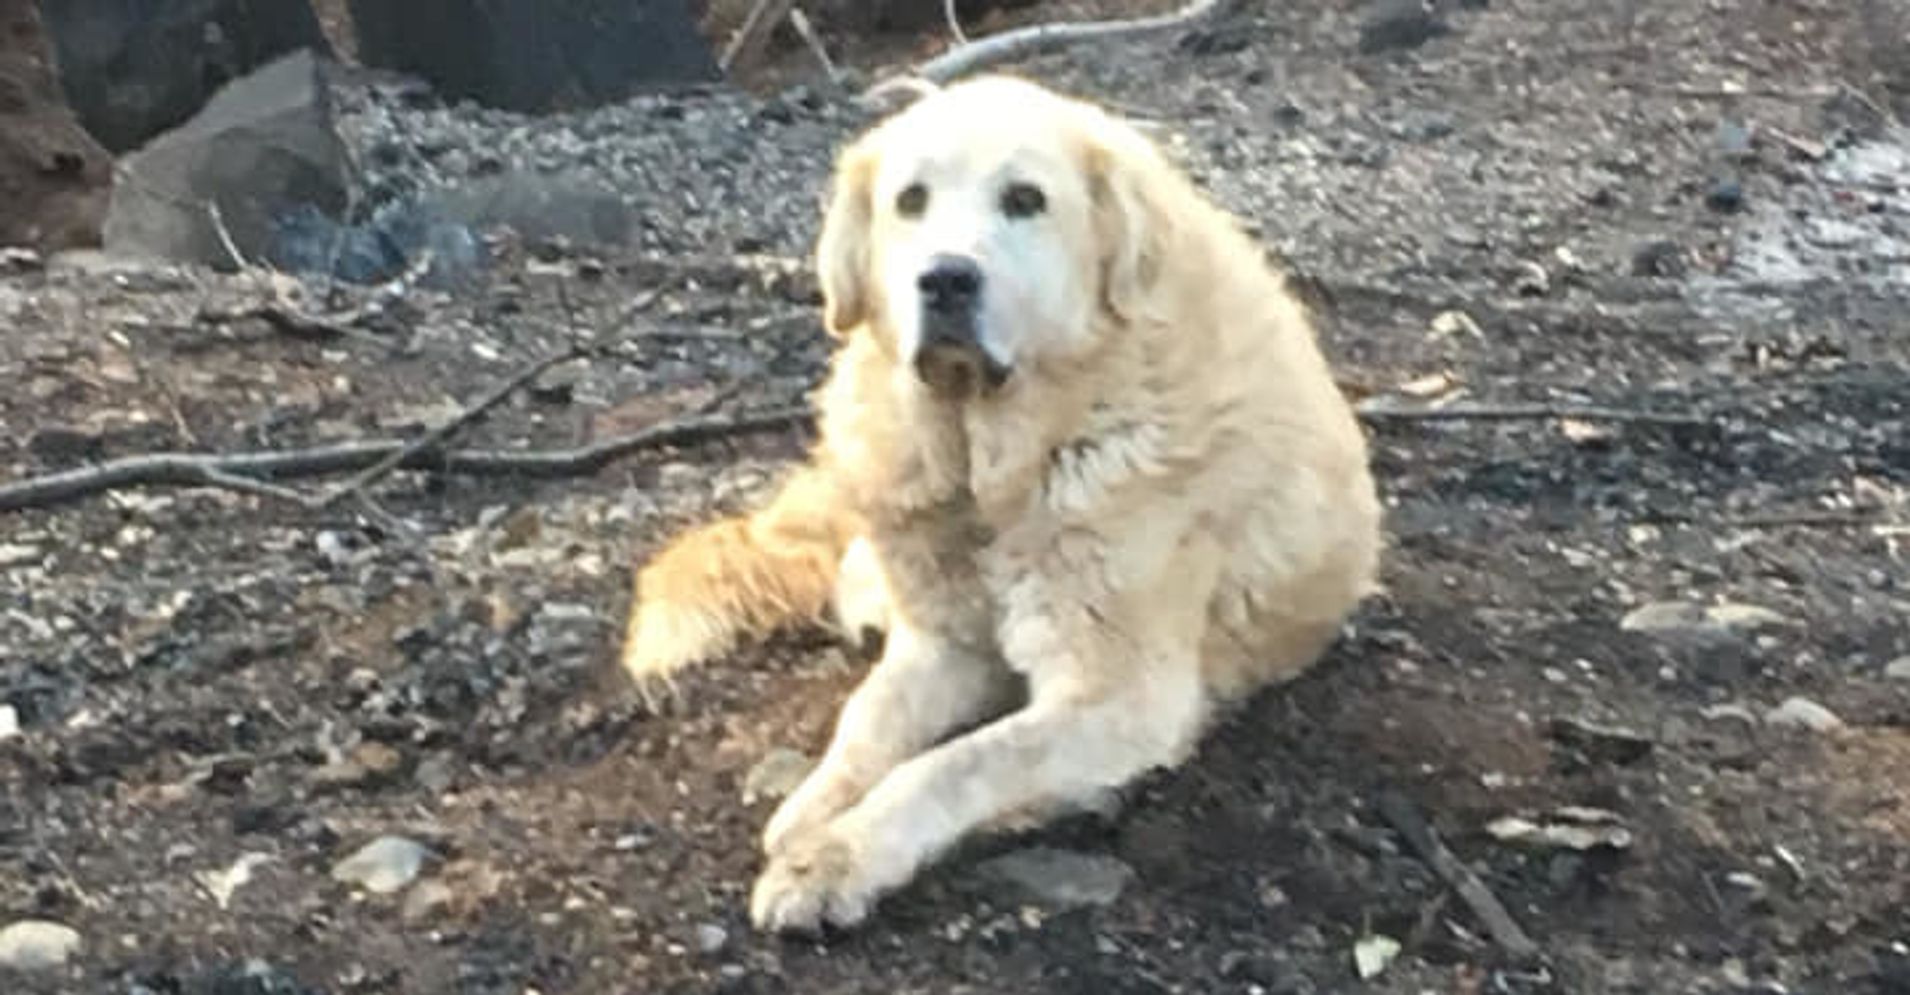 Loyal Dog Found Guarding Home Weeks After Wildfire Burned It To The Ground | HuffPost